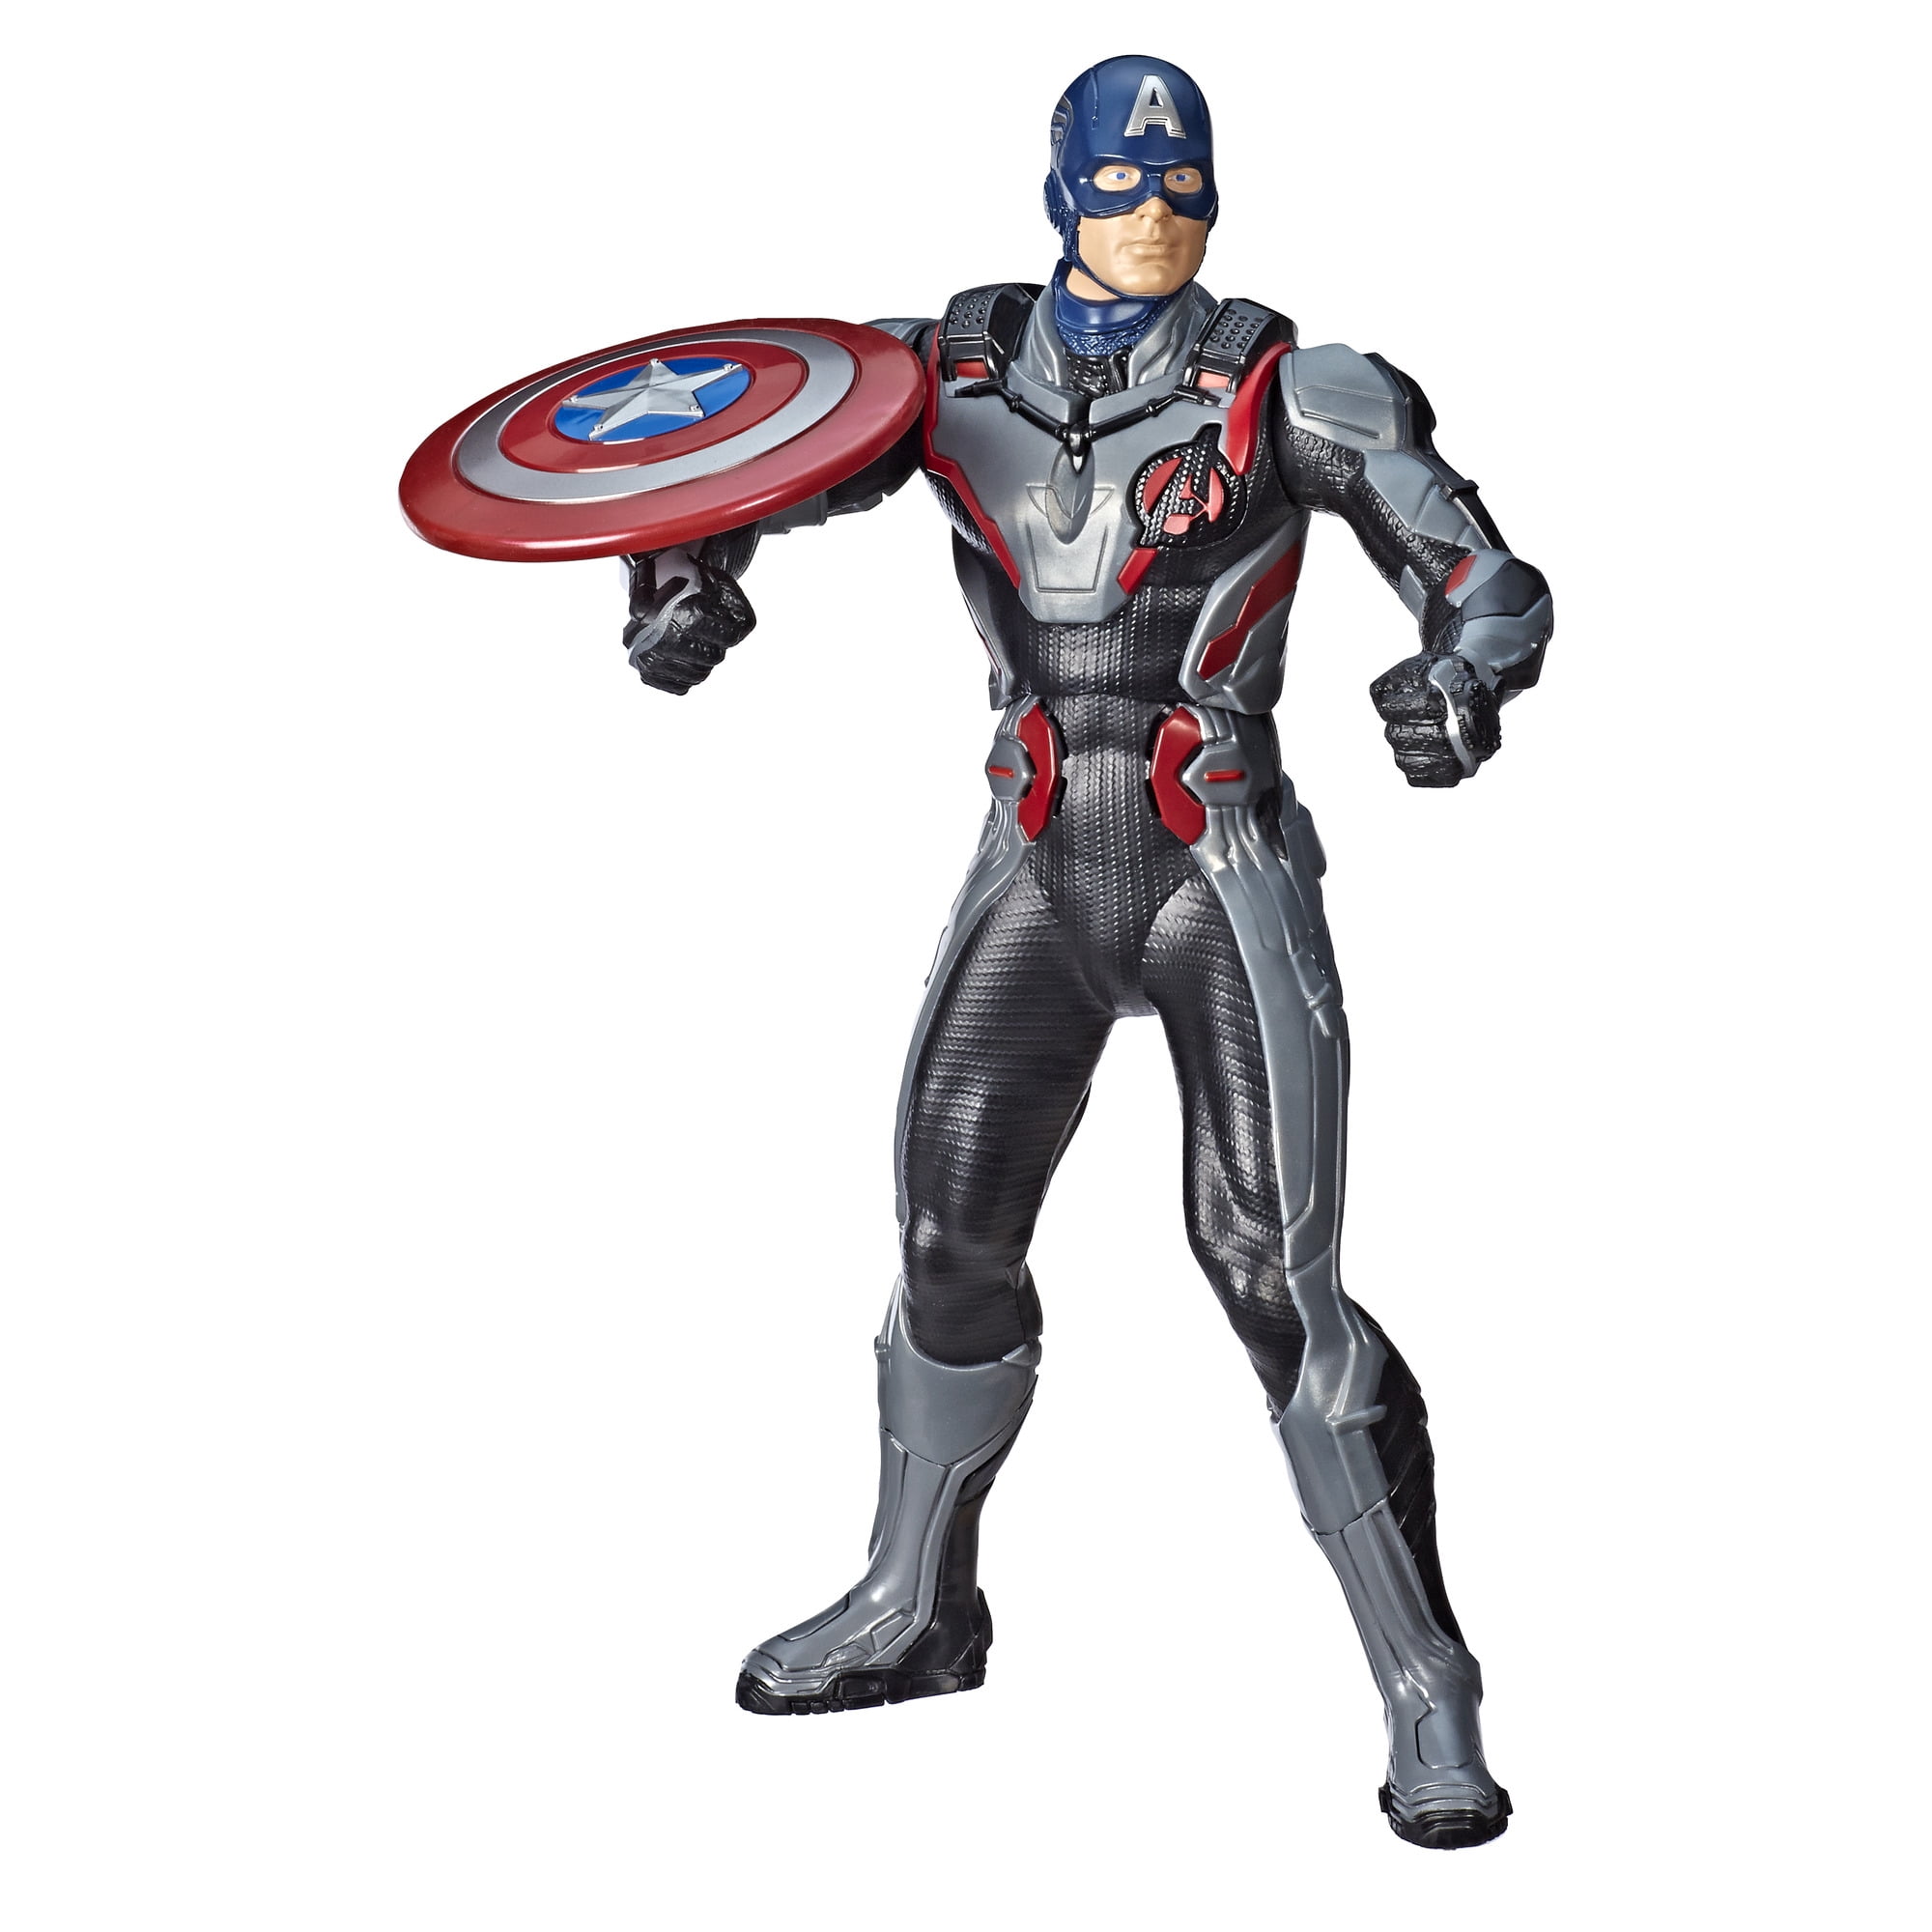 12" The Avengers Marvel Captain America Action Figures Kids Collectible Toy Gift 